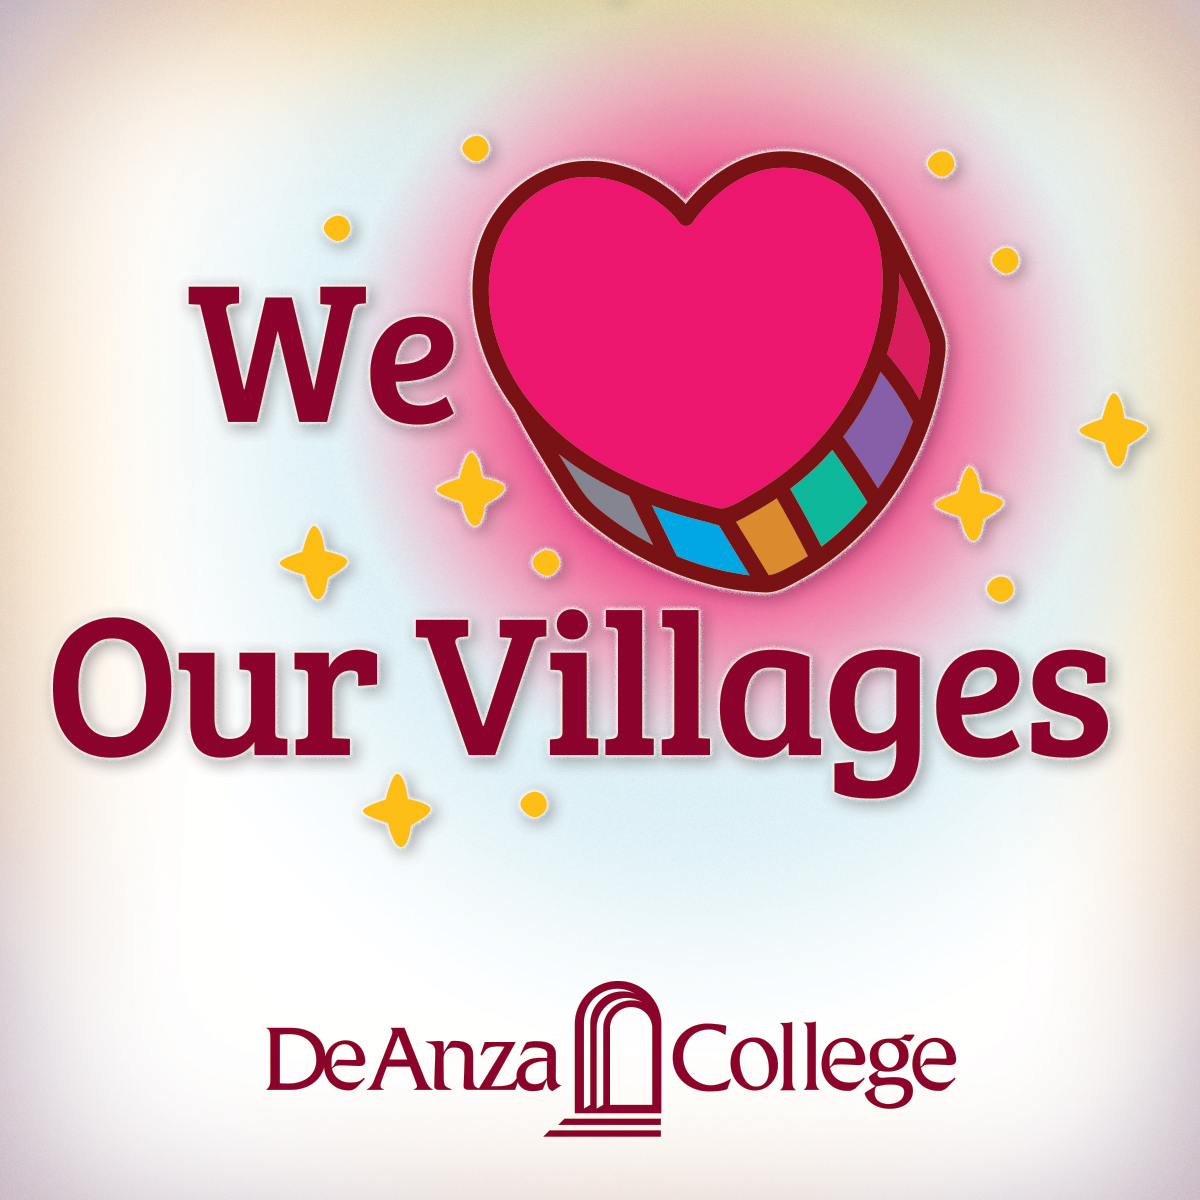 De Anza will celebrate the one-year anniversary of its Village Centers - designated spaces on campus for each of the six Villages - with a daylong, progressive party for students and employees, featuring food, games and giveaways at each location.